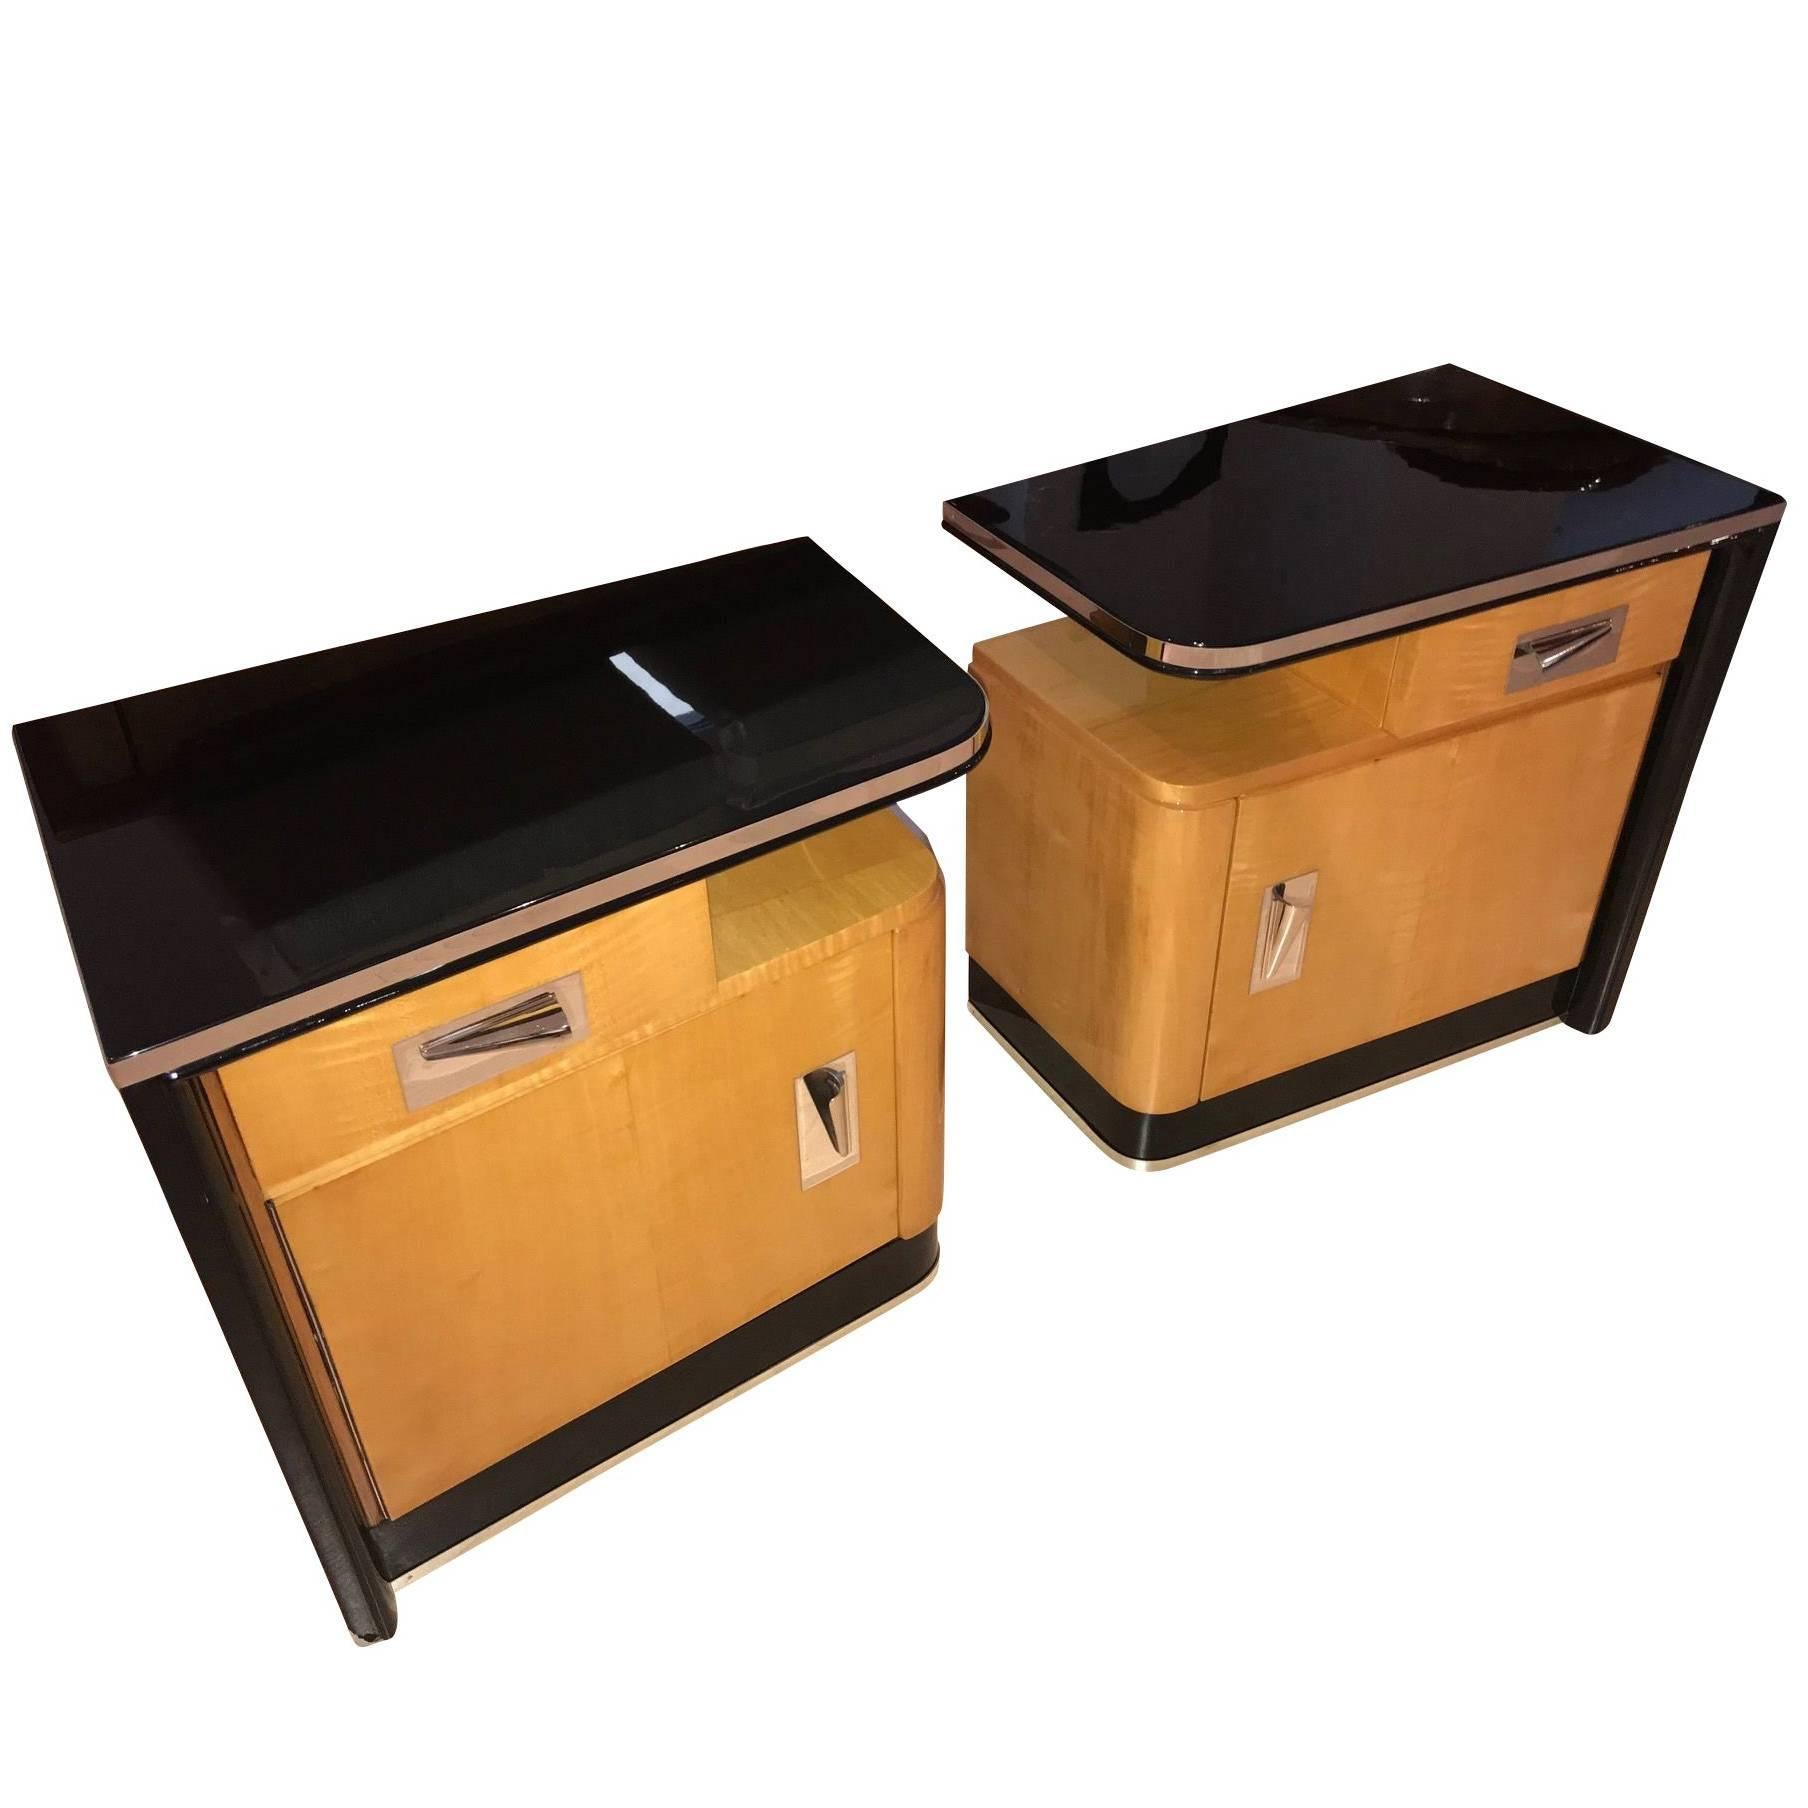 Pair of Art Deco Nightstands, Maple and Chrome, France, circa 1940